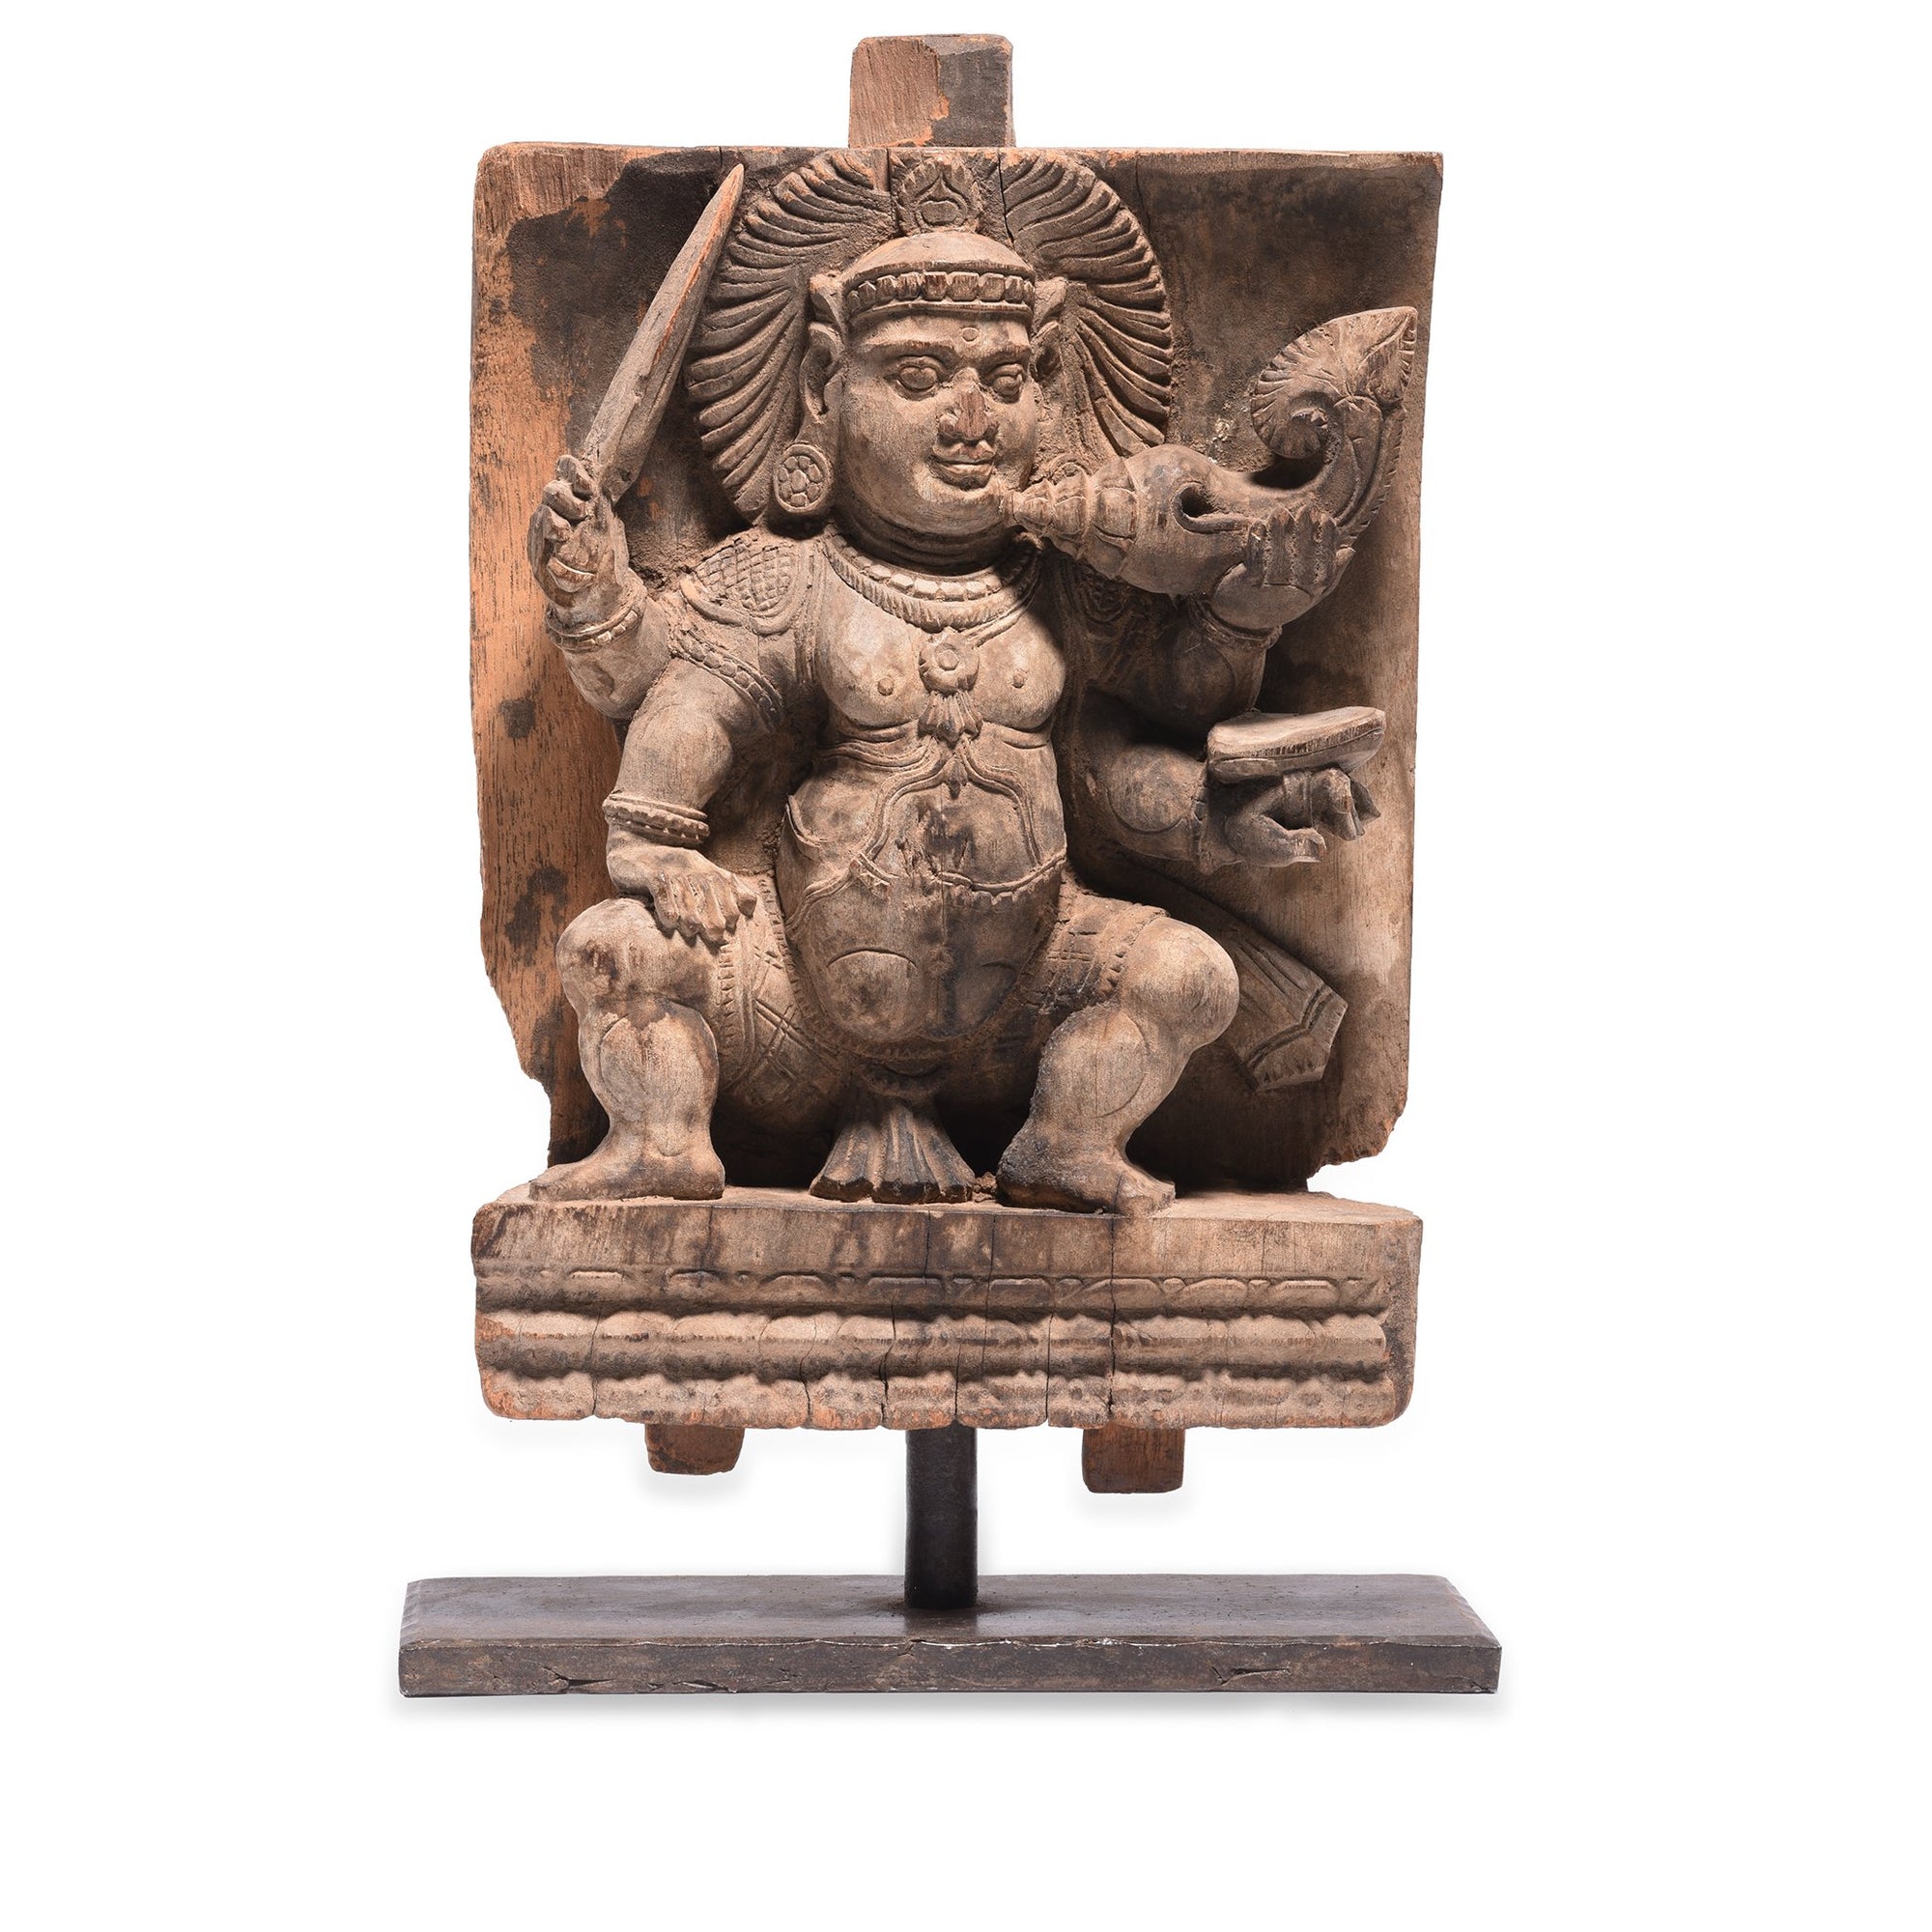 Carved Teak Chariot Carving - Vishnu - 18thC - 21 x 5 x 29 (wxdxh cms) excluding stand - A5917